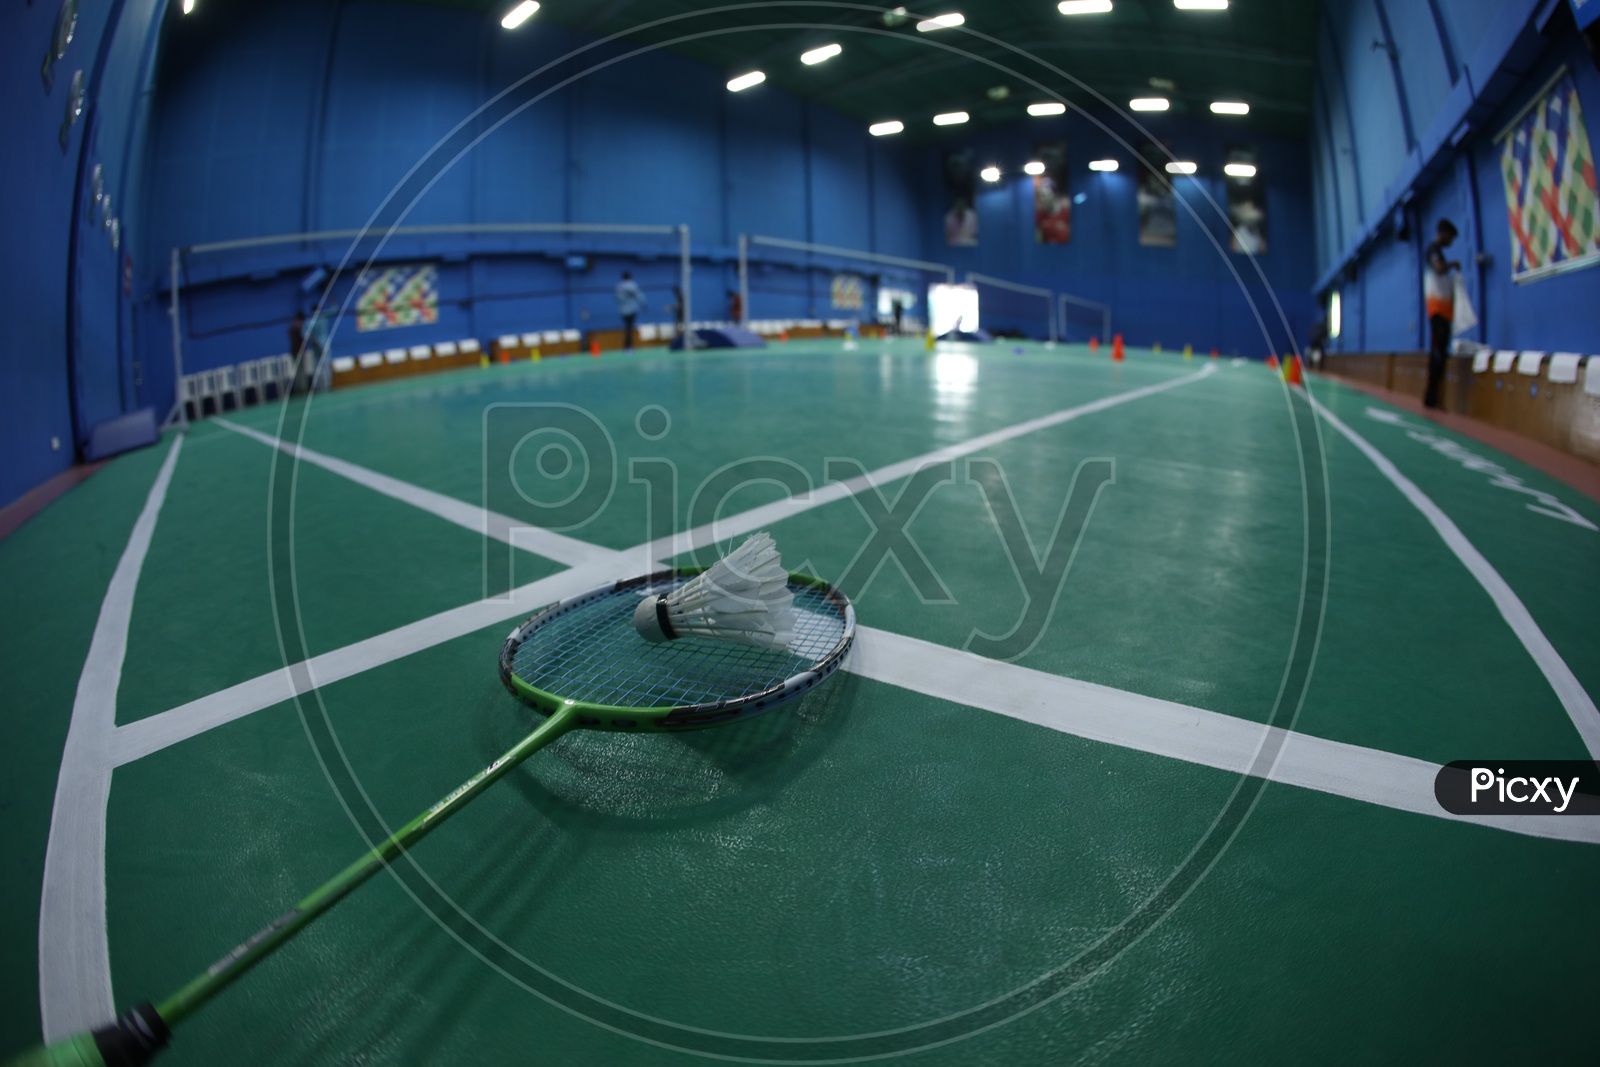 Shuttle Badminton Indoor Synthetic Court  With Shuttle And Badminton Bat